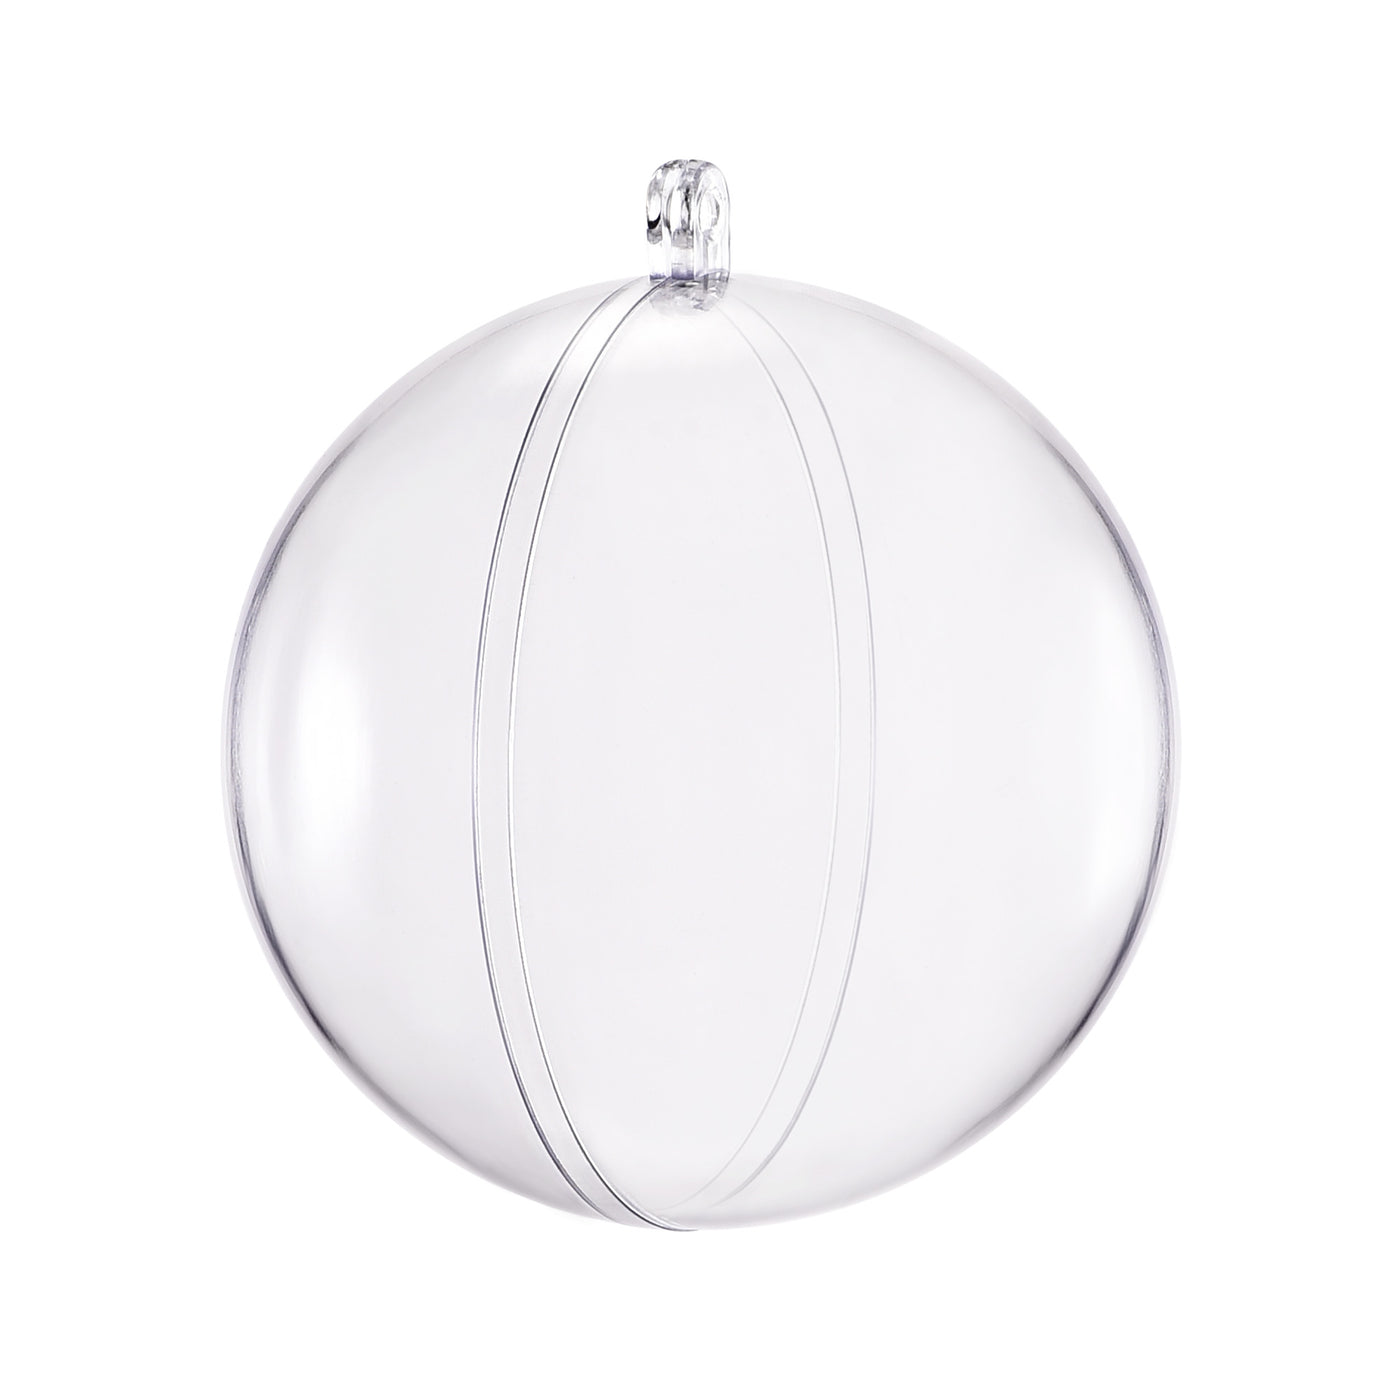 Uxcell Uxcell 20pcs 4-inch(100mm) Clear Plastic Ornaments Ball